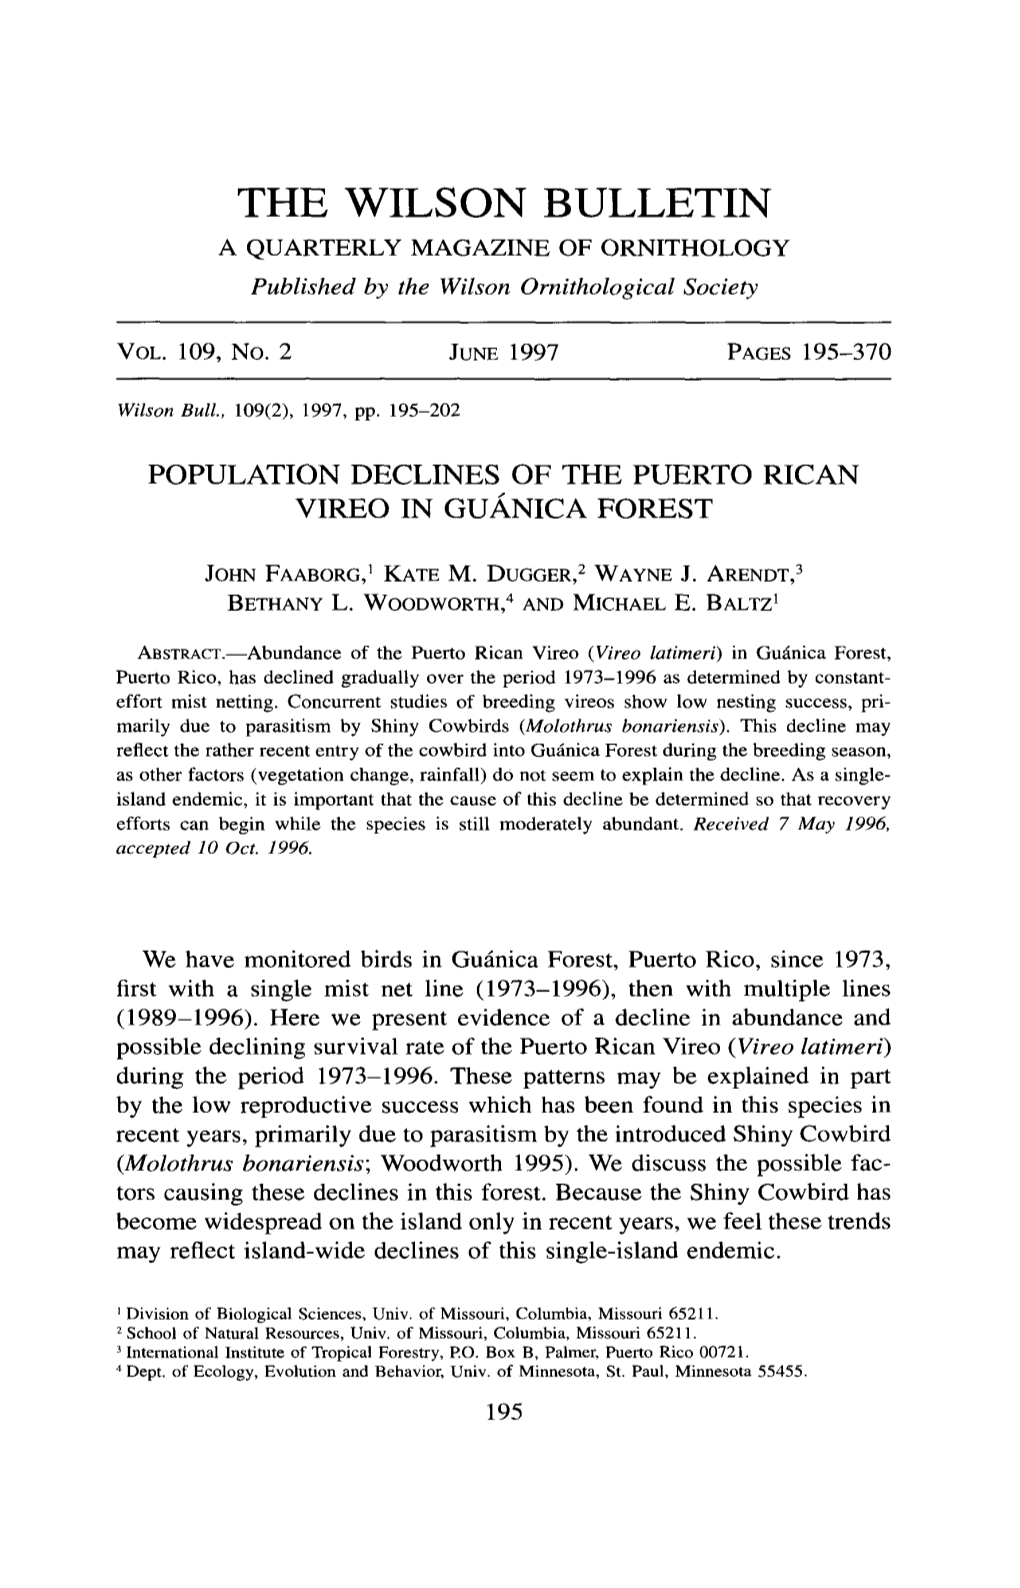 POPULATION DECLINES of the PUERTO RICAN VIREO in Gulinica FOREST